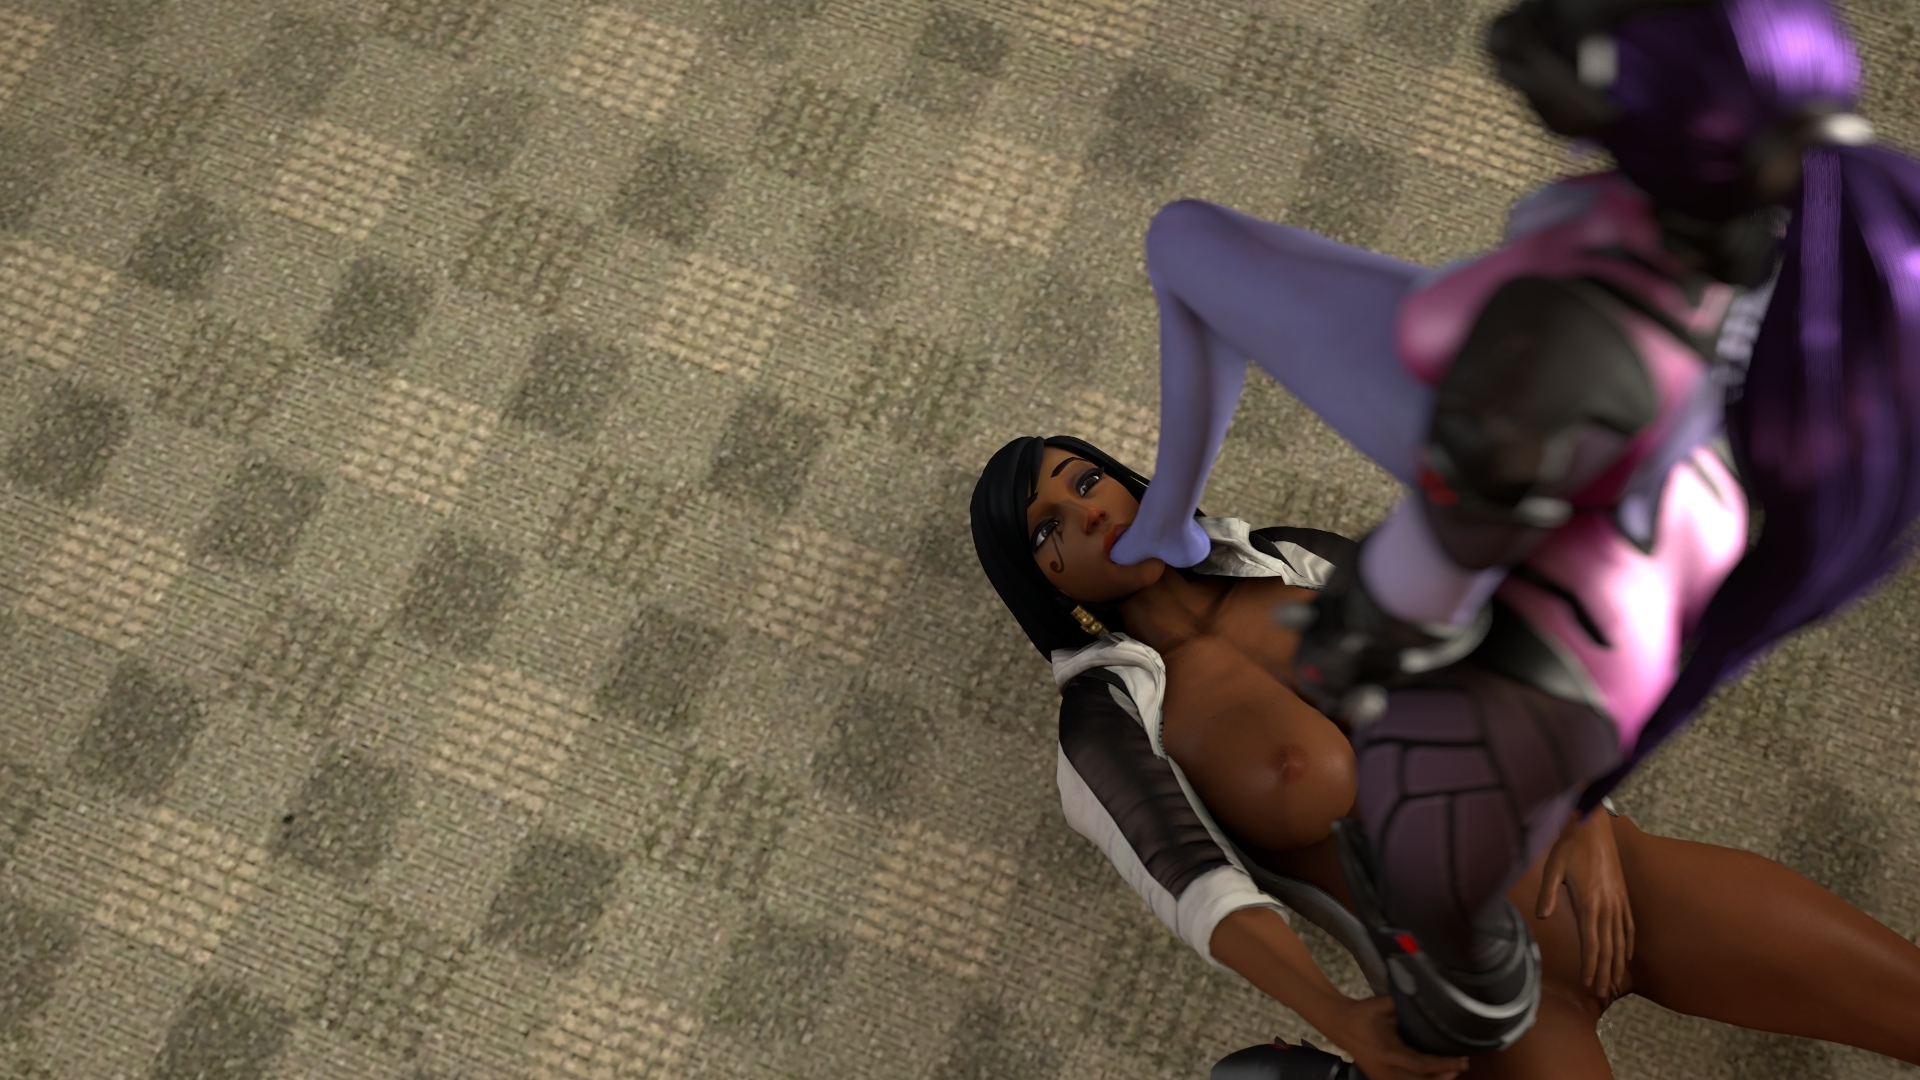 Do not disturb Pharah Overwatch Widowmaker 3d Porn Boobs Lesbian Fingering Pussy Squirting Tasting Pussy Penetration Feet Domination 10